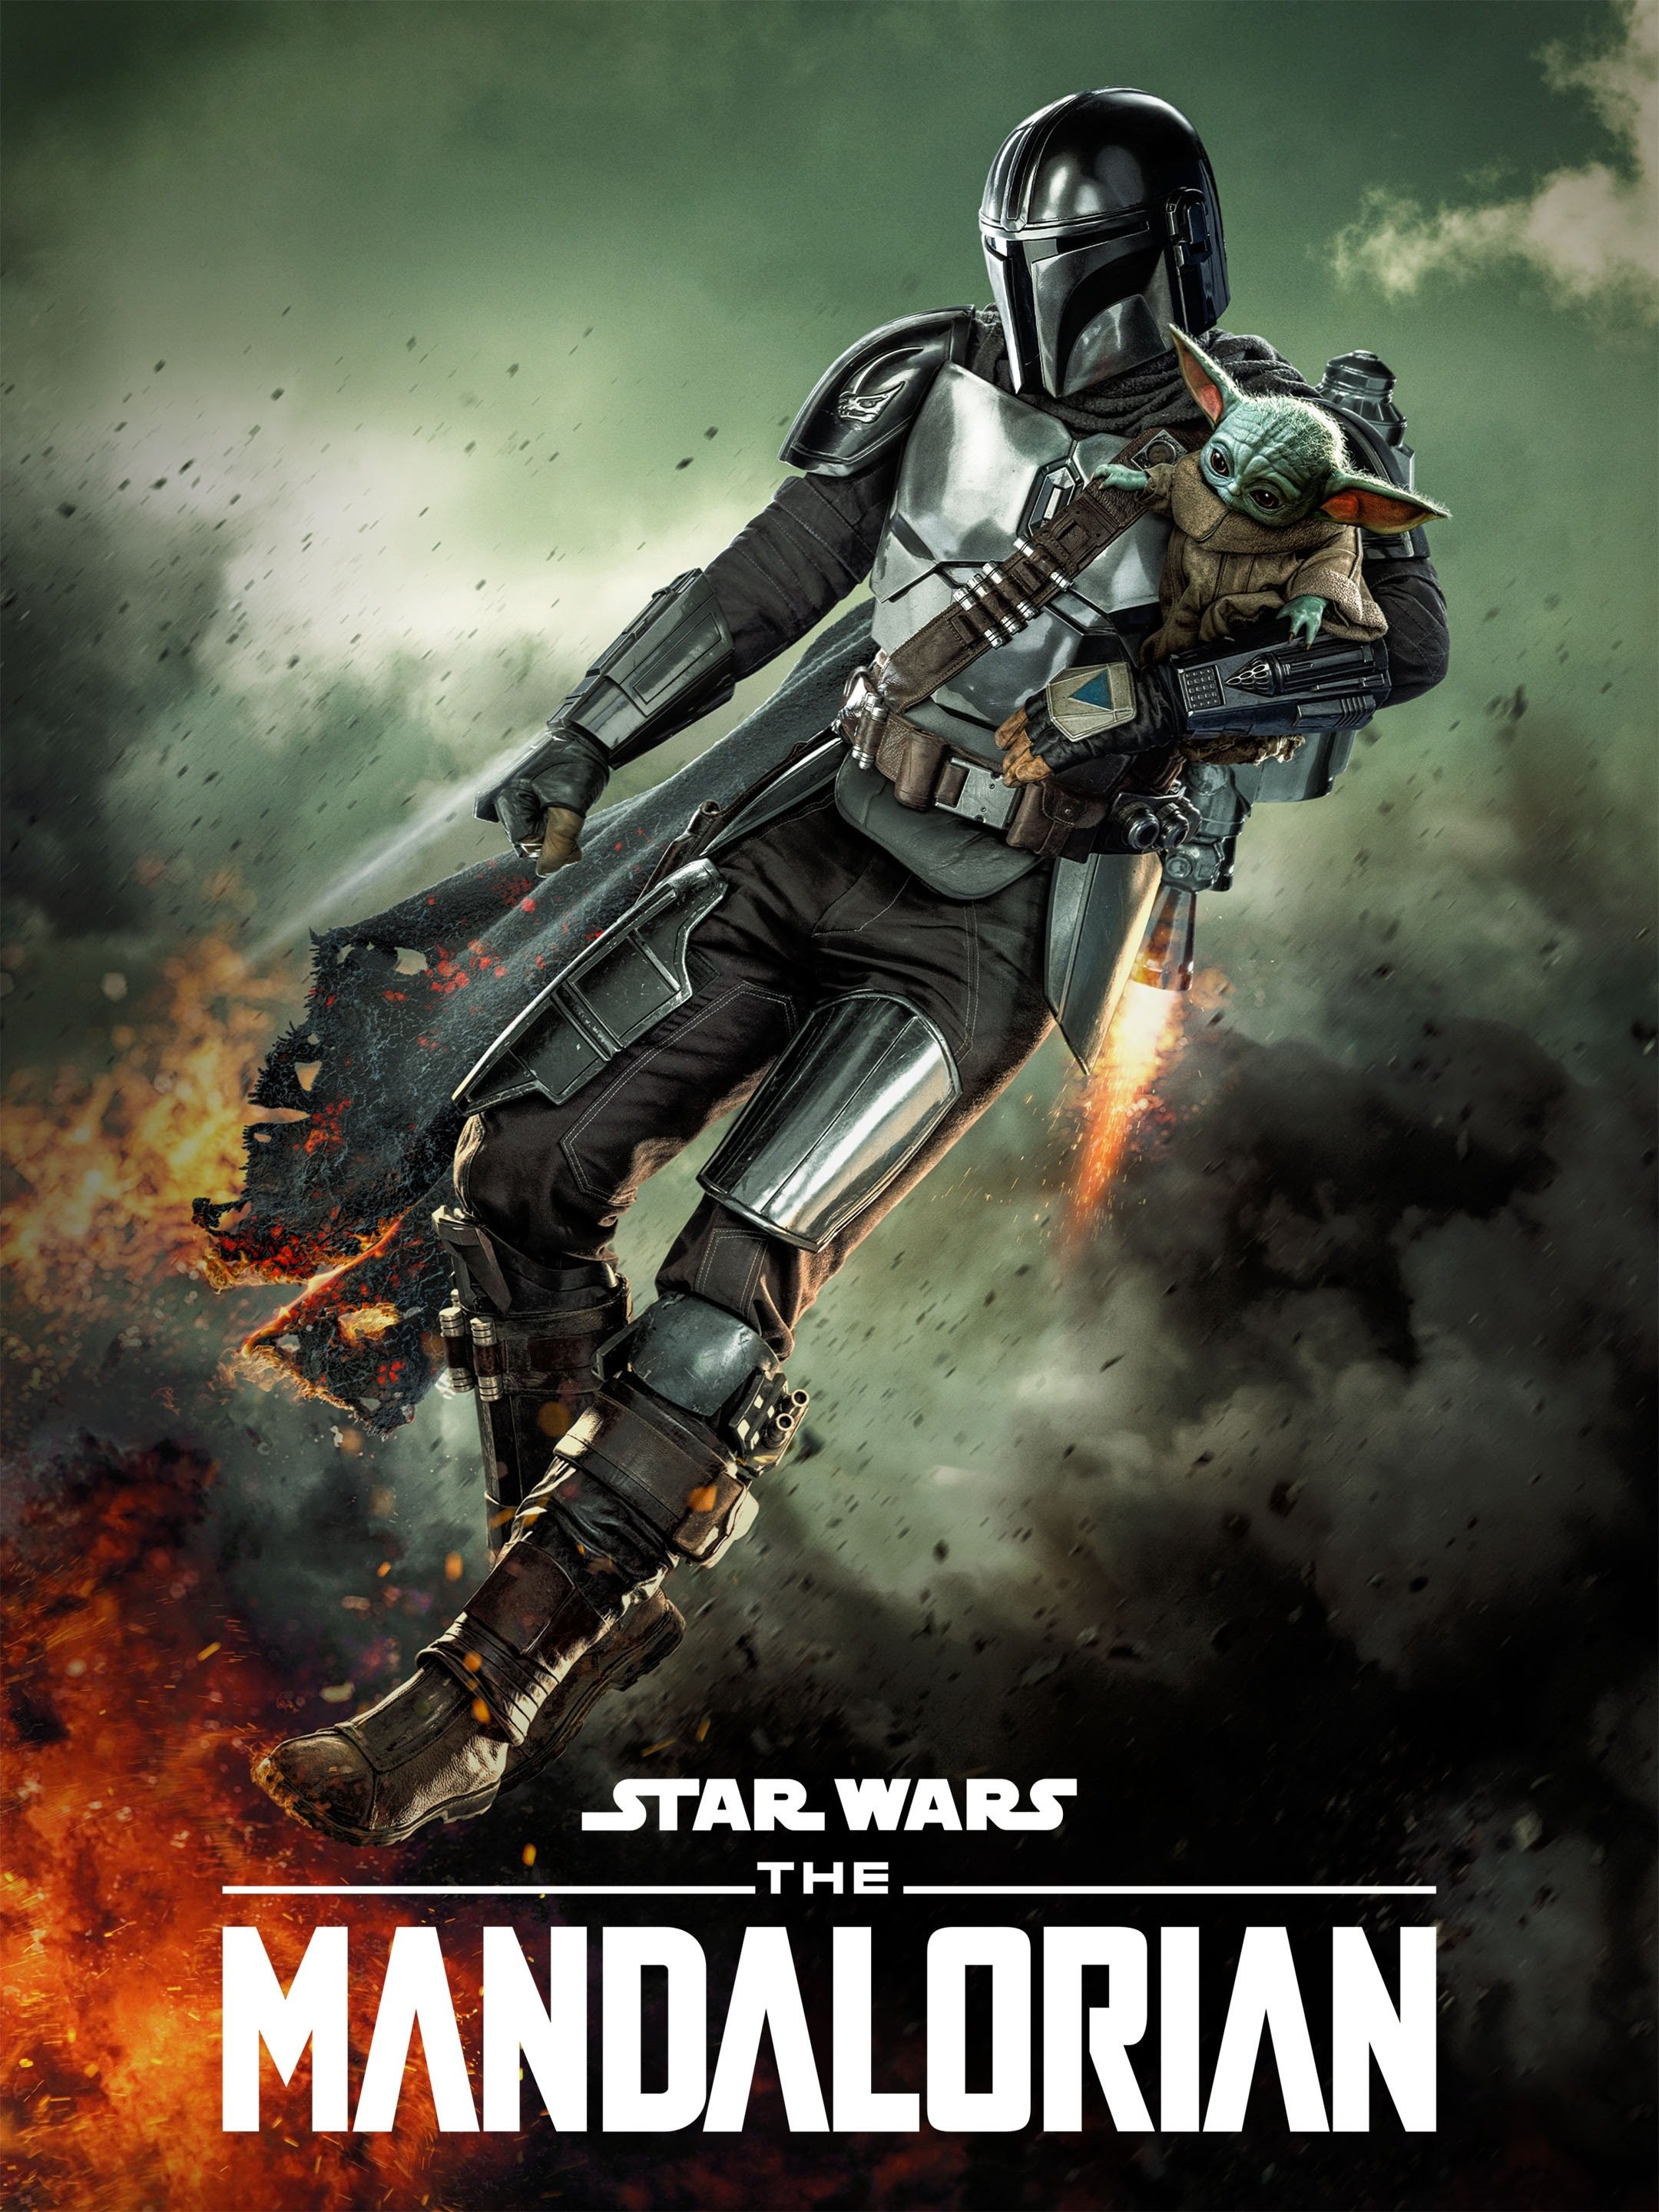 Rotten Tomatoes - The official poster for The Mandalorian